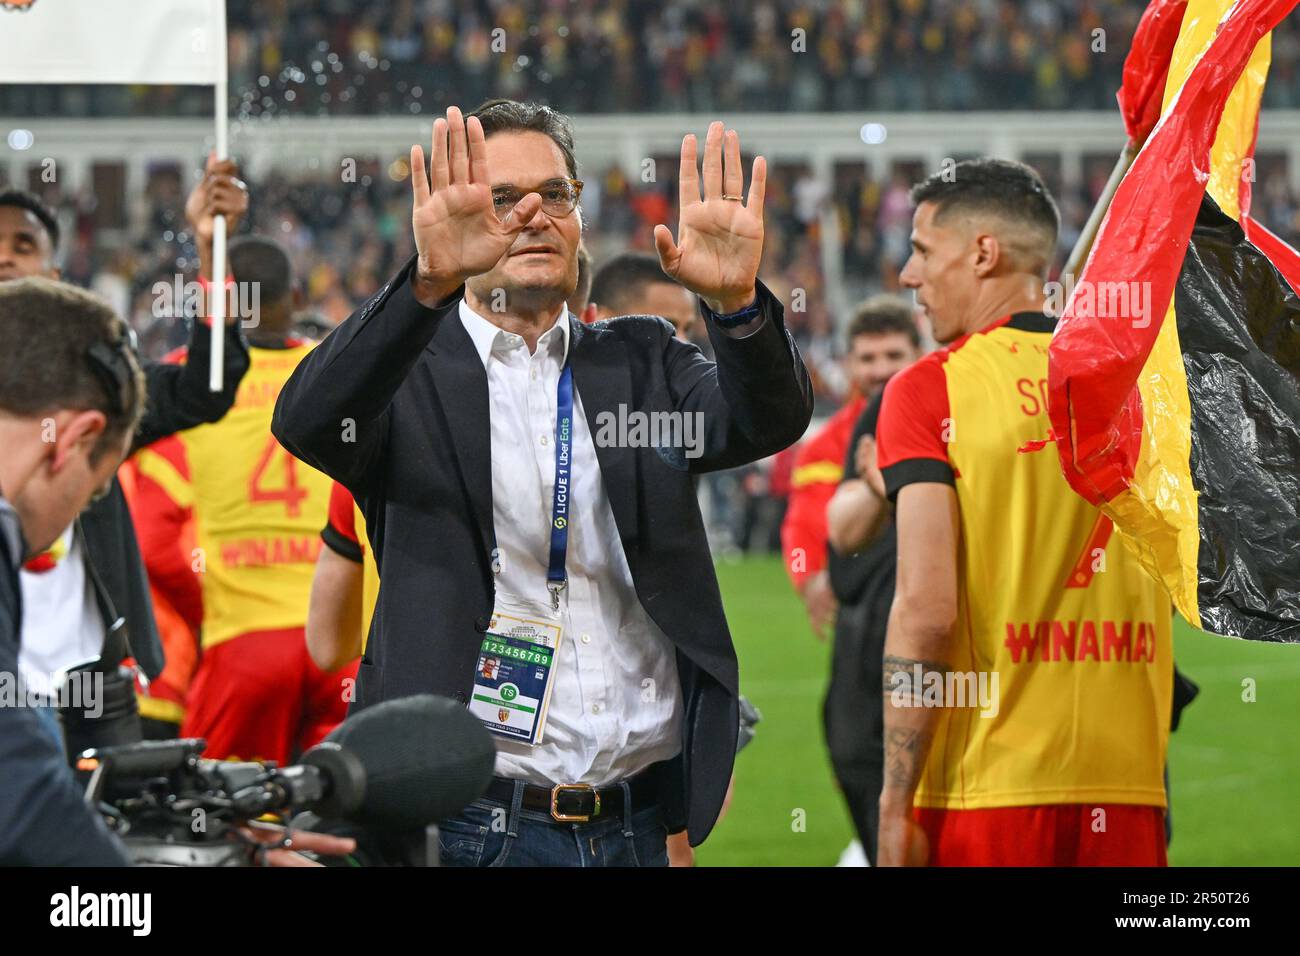 President Joseph Oughourlian of RC Lens pictured celebrating with his  players of RC Lens after winning a soccer game between t Racing Club de Lens  and AC Ajaccio, on the 37th matchday